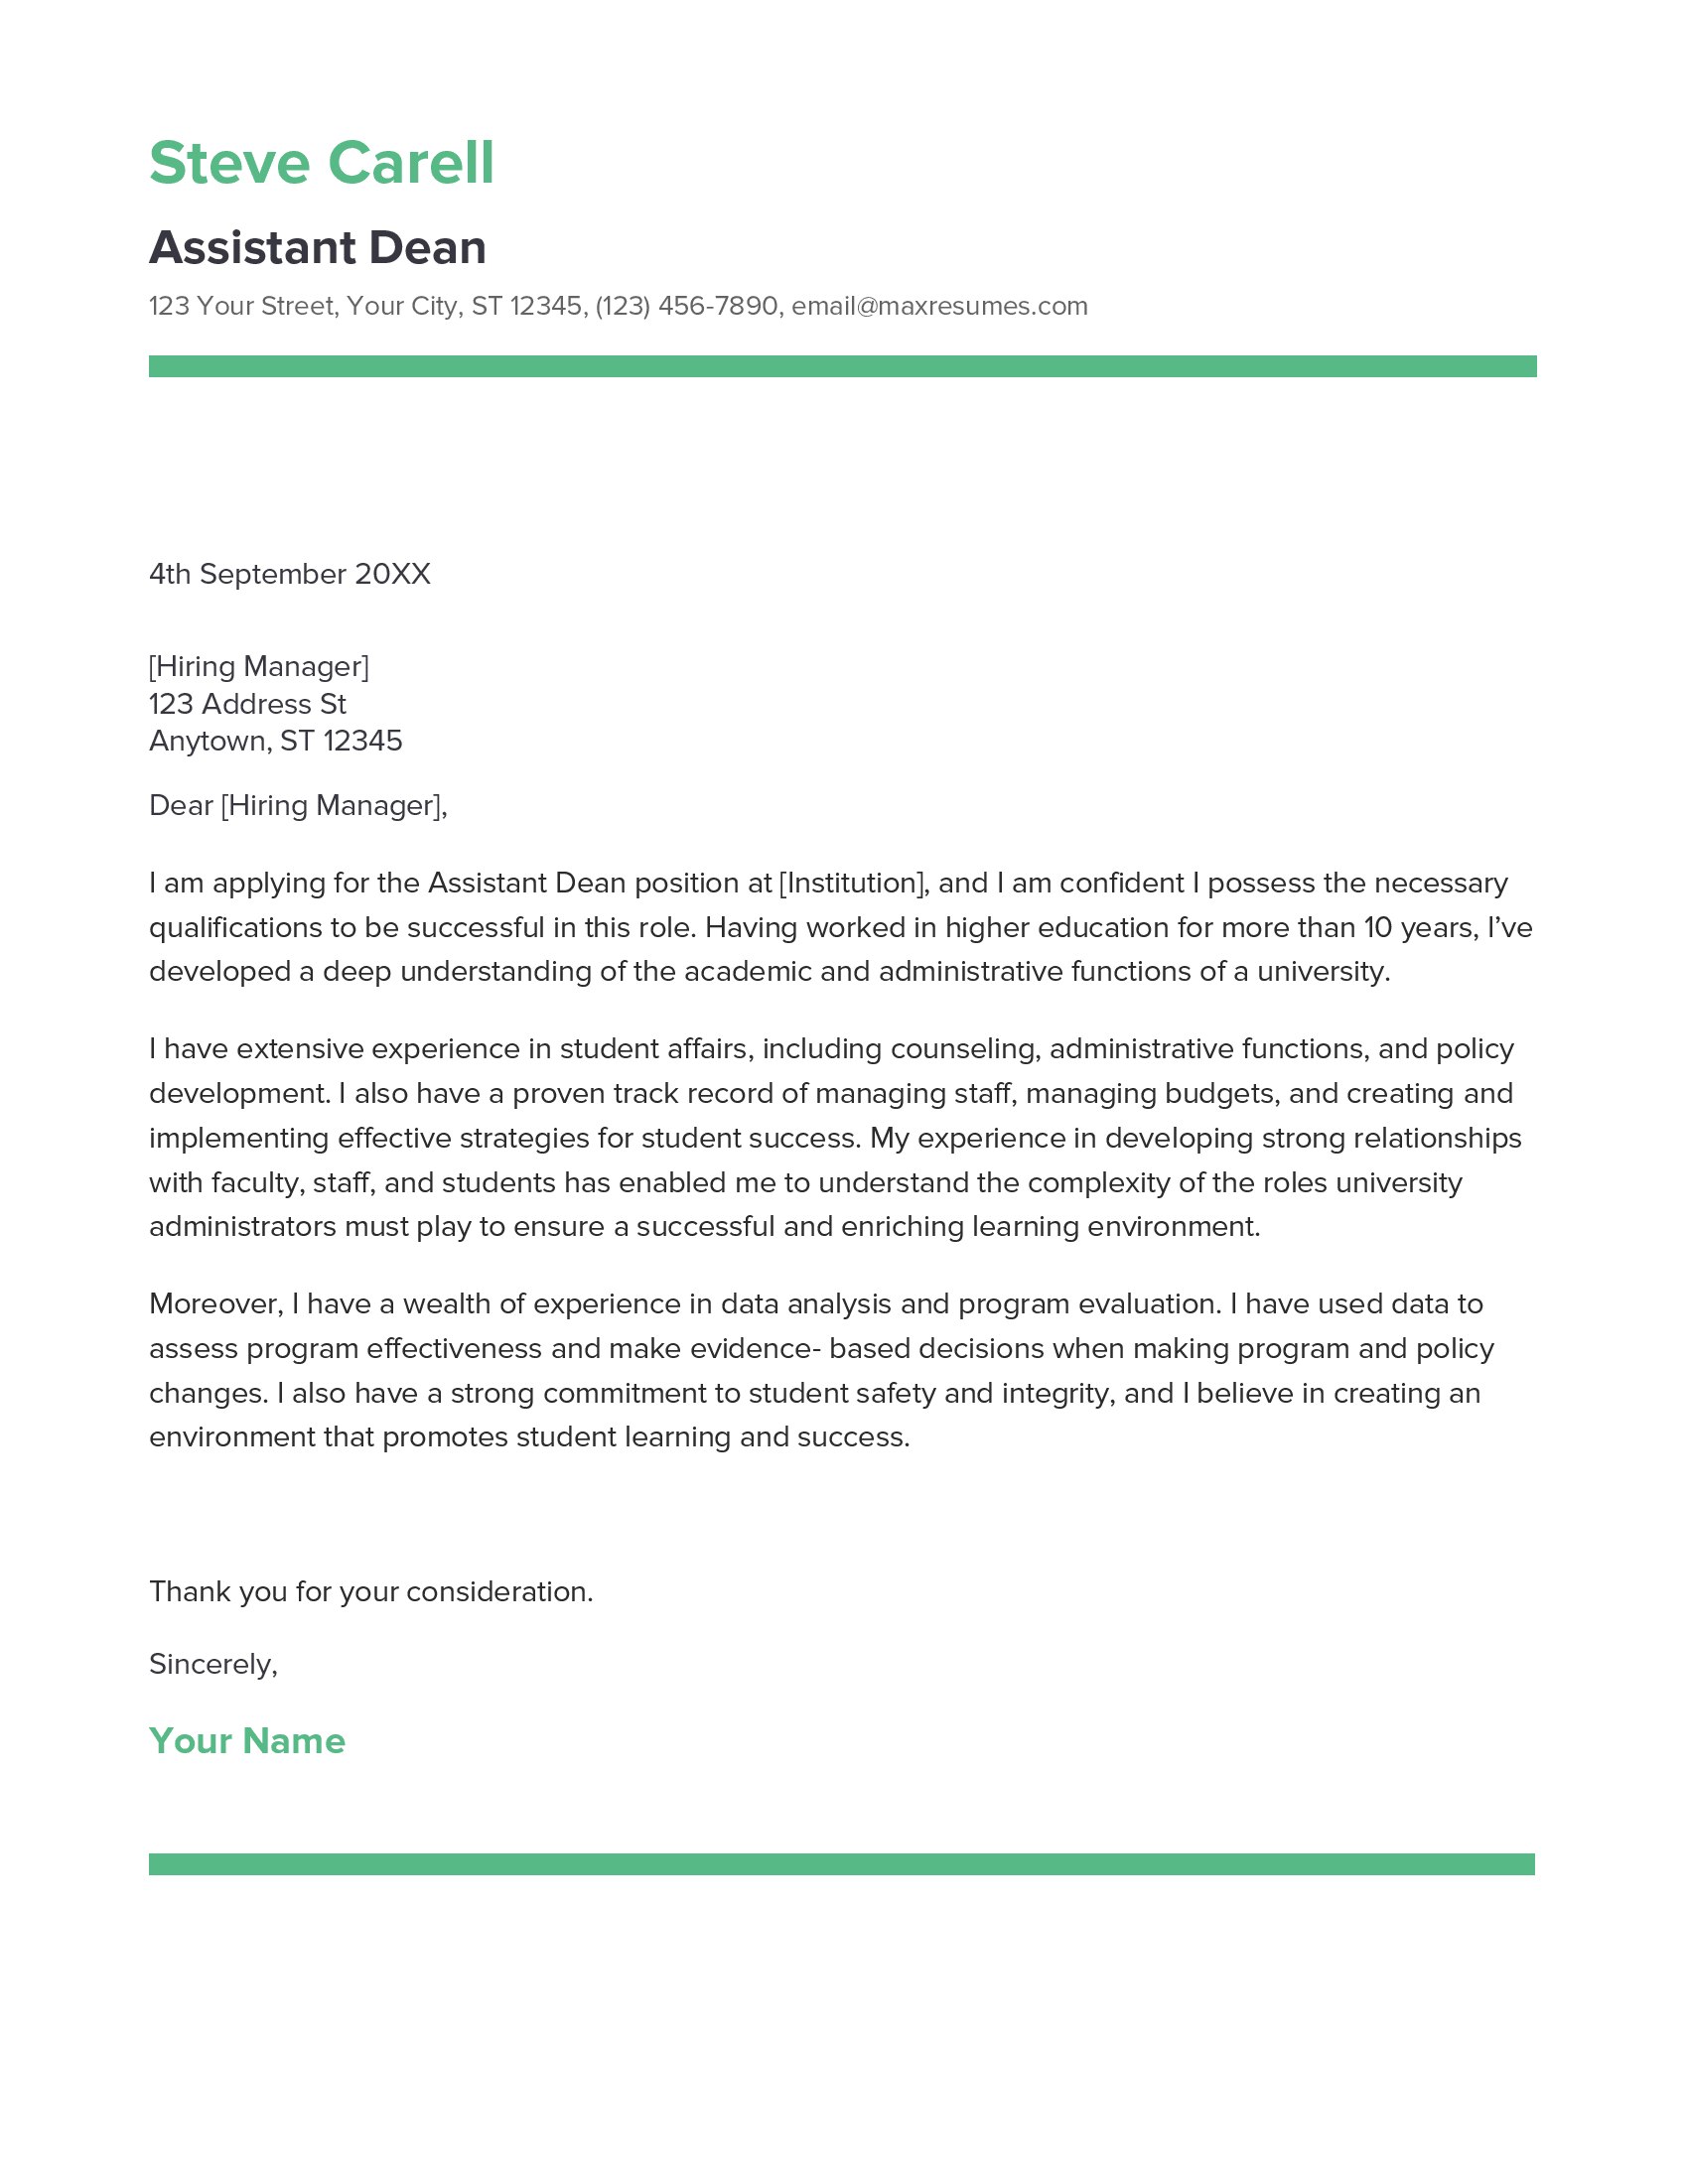 Assistant Dean Cover Letter Example